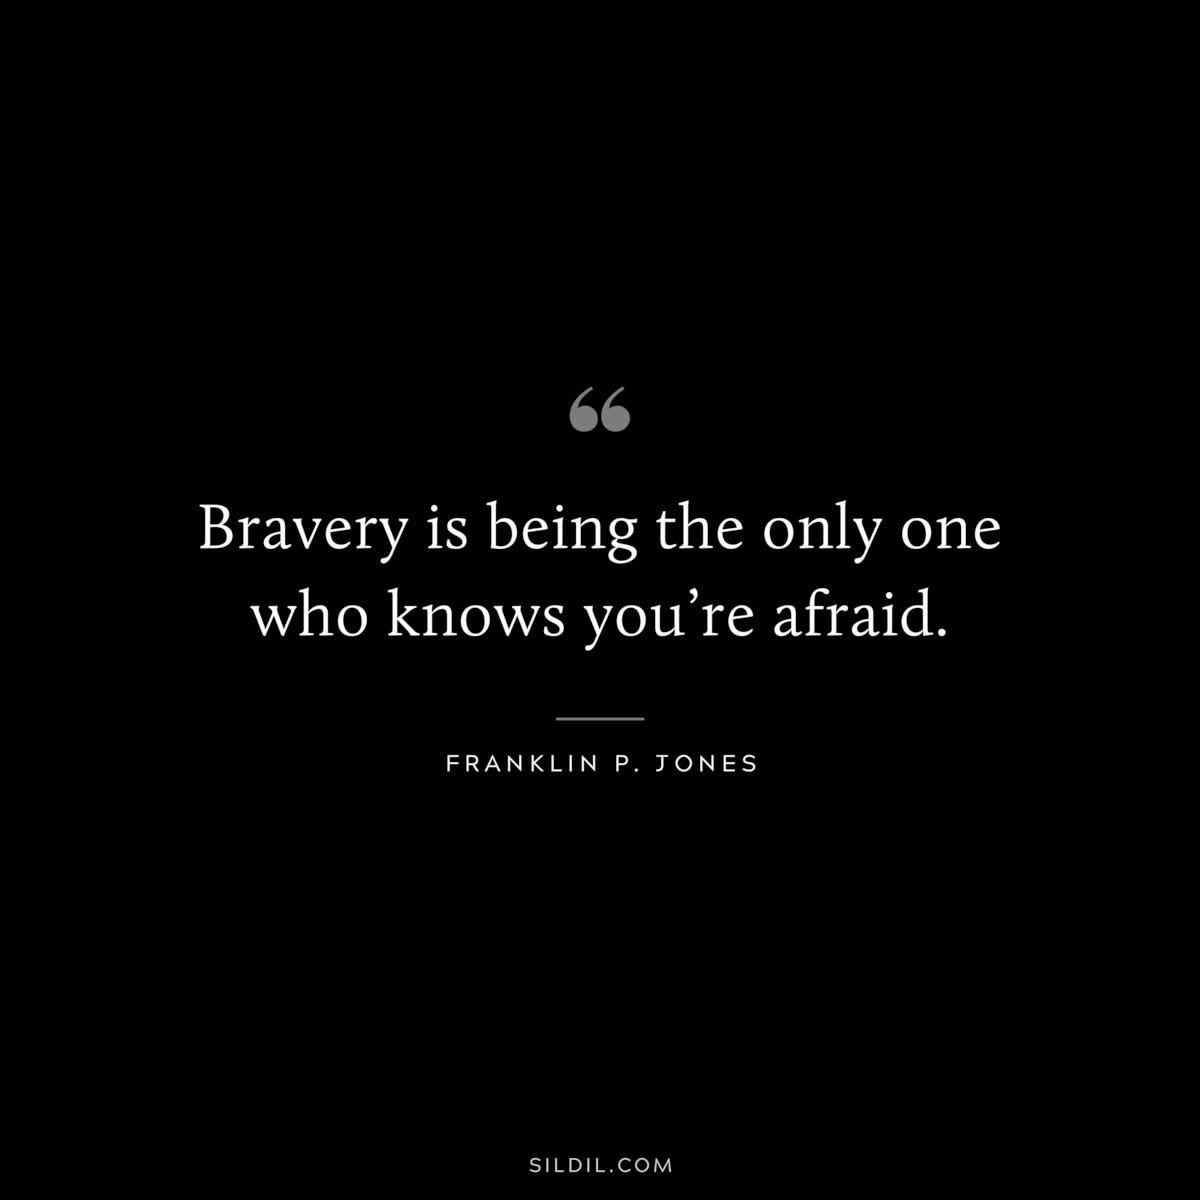 Bravery is being the only one who knows you’re afraid. ― Franklin P. Jones